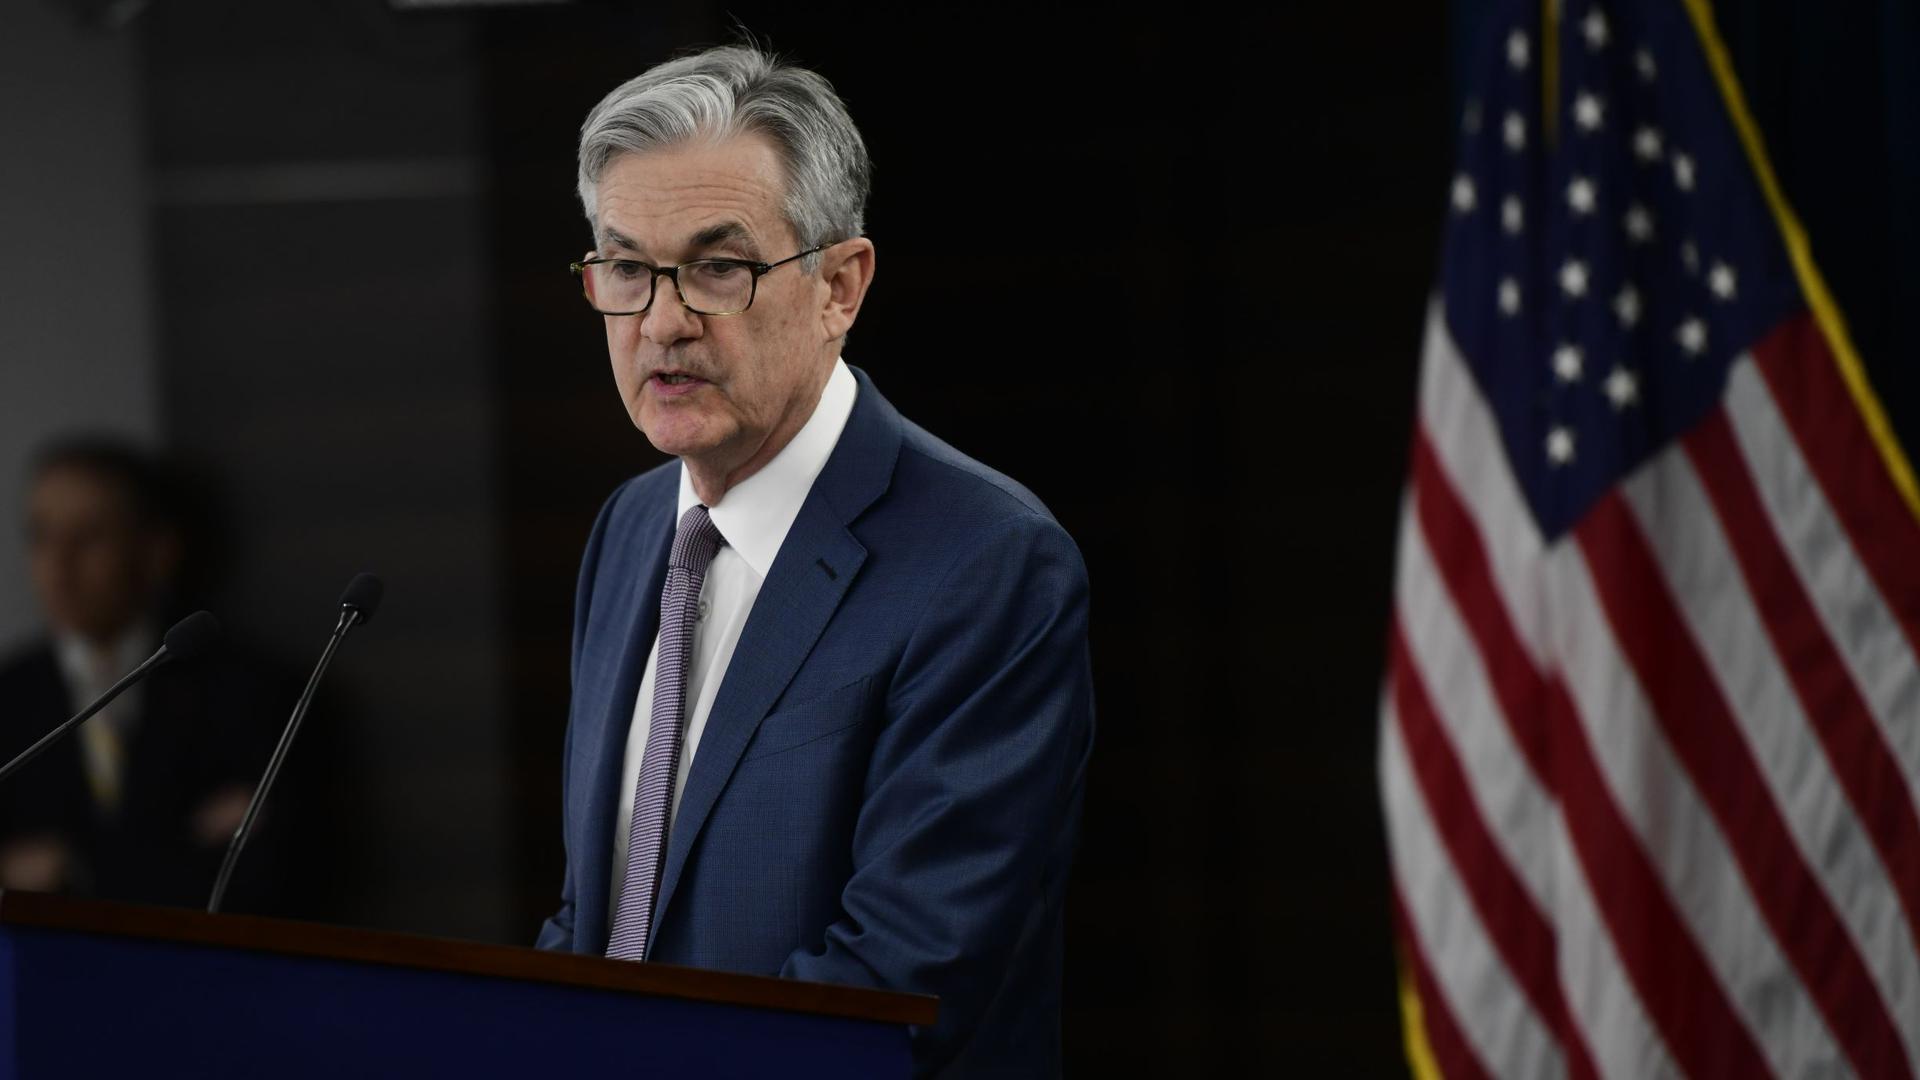 Federal Reserve Board Chairman Jerome Powell speaks during a news conference following a Federal Open Market Committee meeting, at the Federal Reserve Board Building in Washington DC, November 2, 2022.